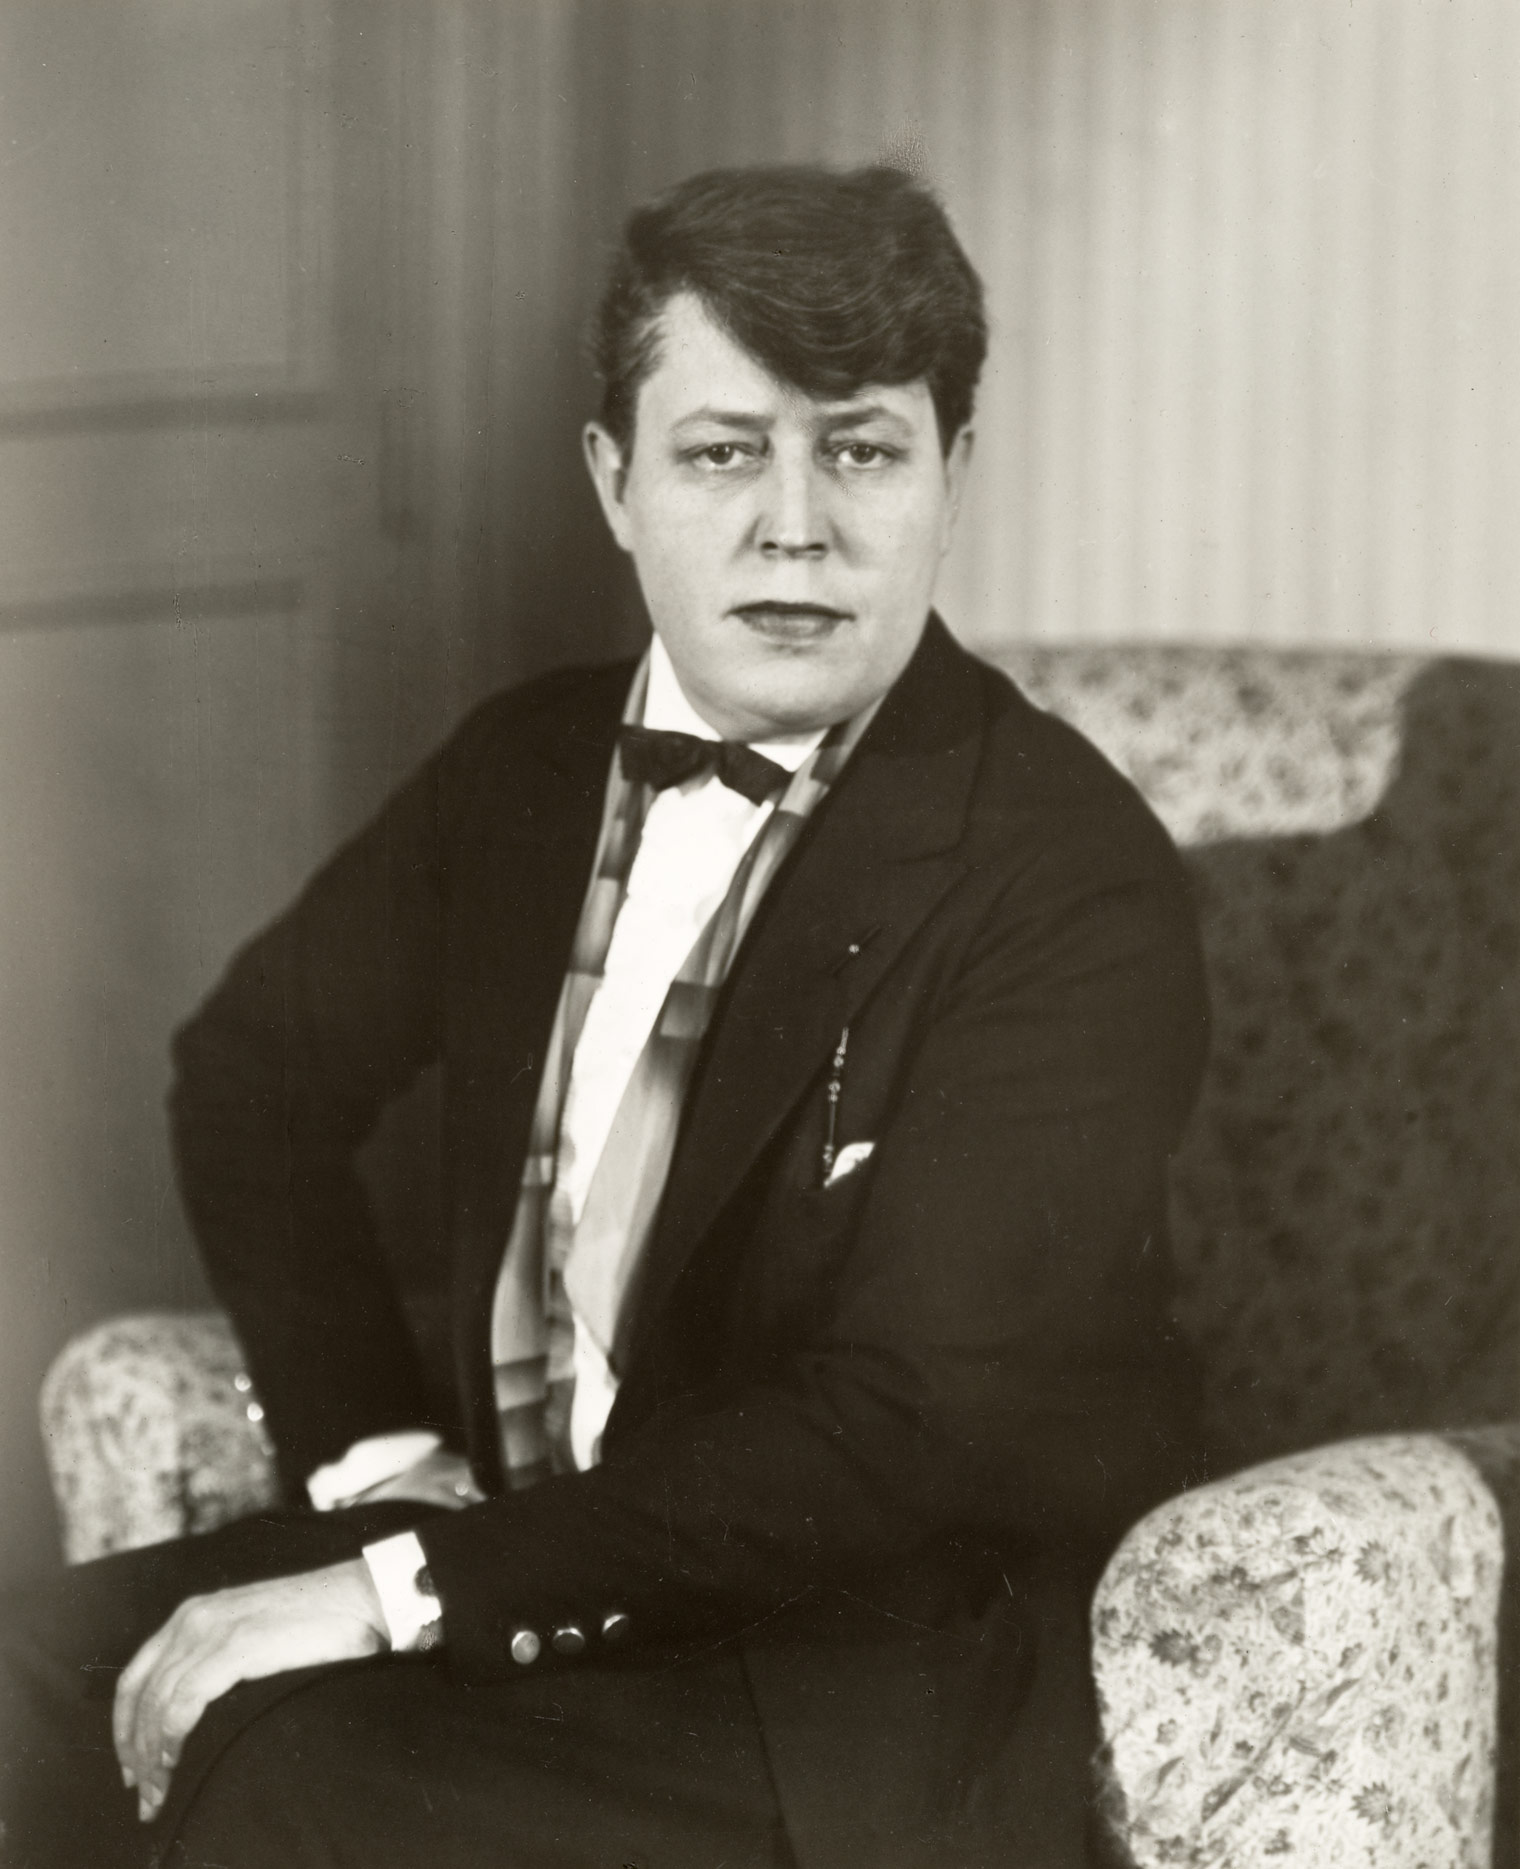 A Berenice Abbott portrait of Jane Heap, showing the sitter wearing a fitted suit and staring intently at the camera